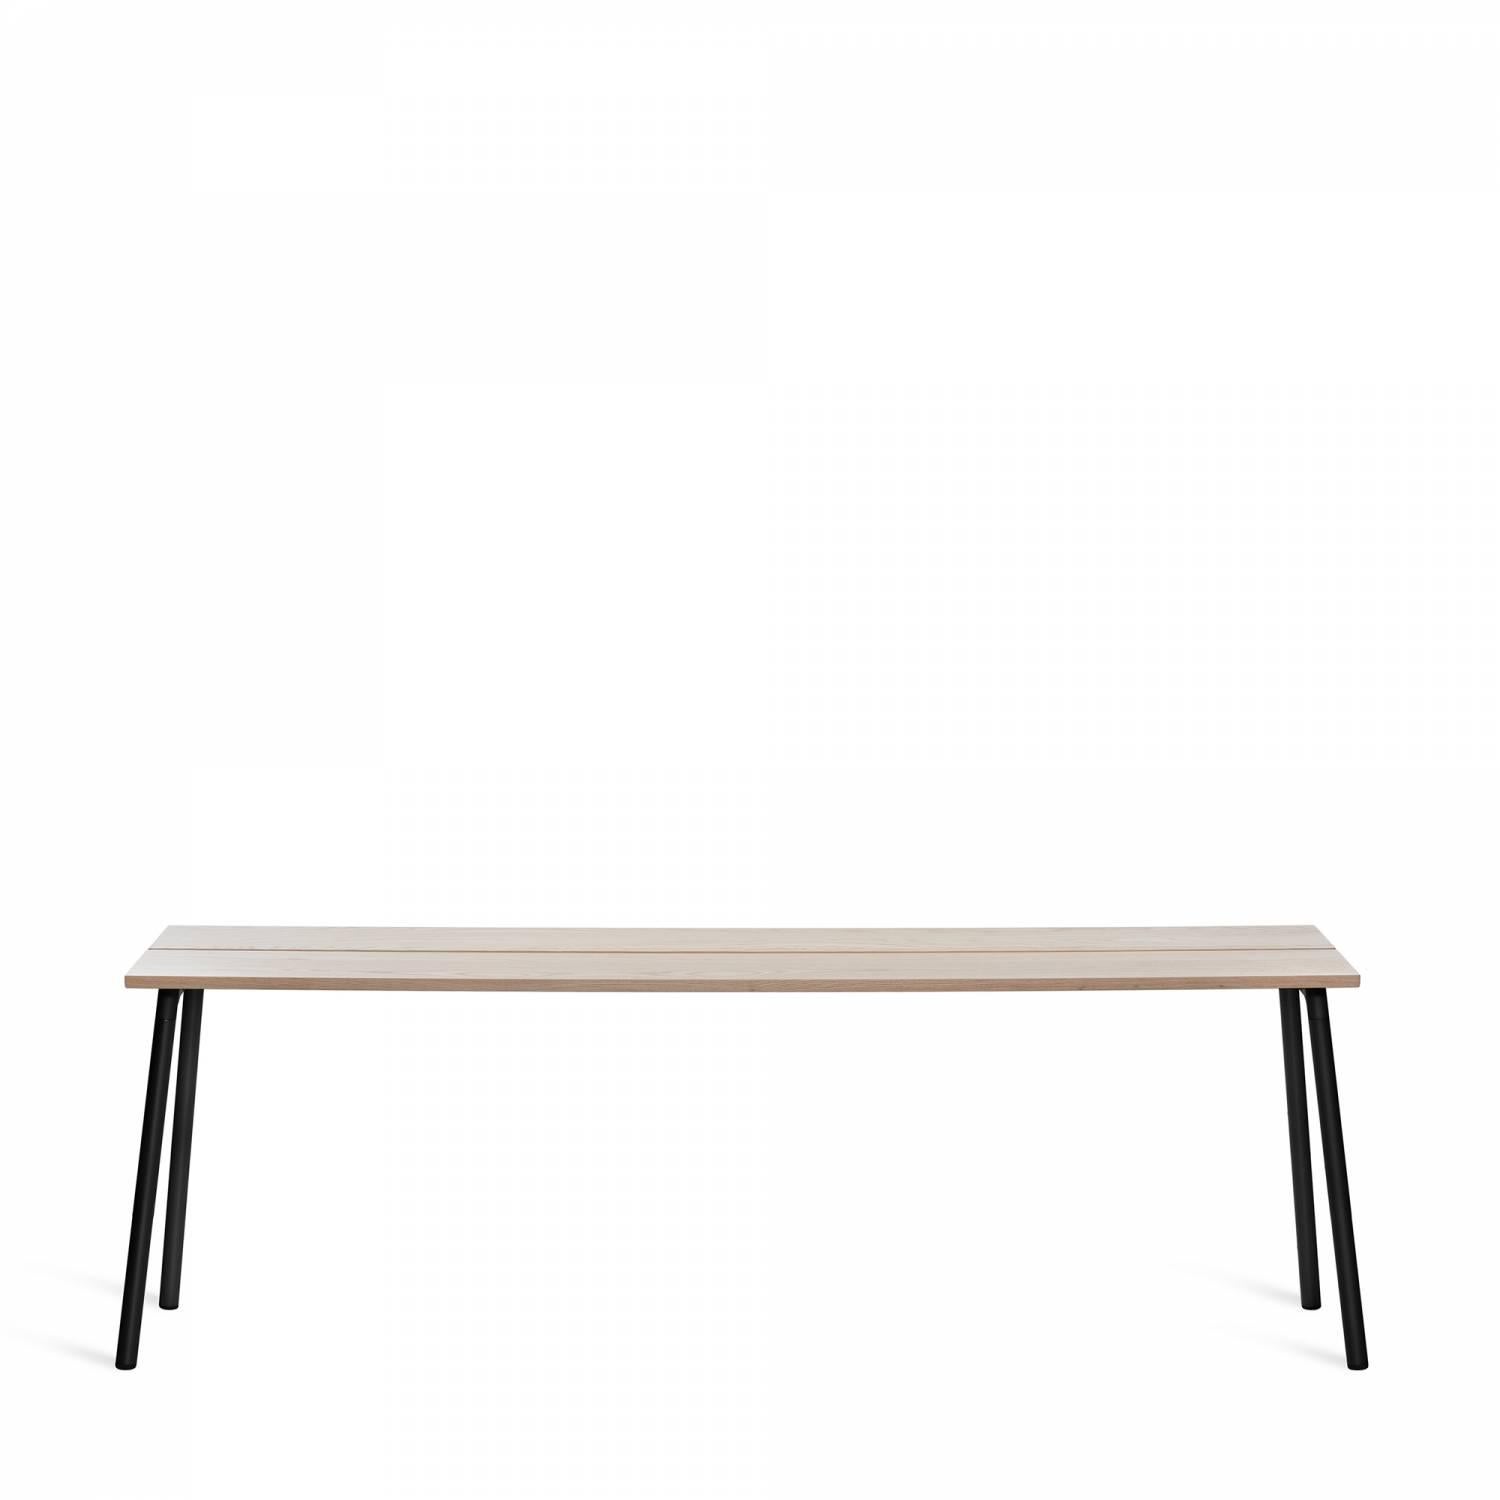 Run is a collection of tables, benches and shelves by Sam Hecht and Kim Colin, designers of the simple and no-nonsense. Run effortlessly finds balance in both indoor and outdoor landscapes suited for meeting, eating, learning, sharing and working.